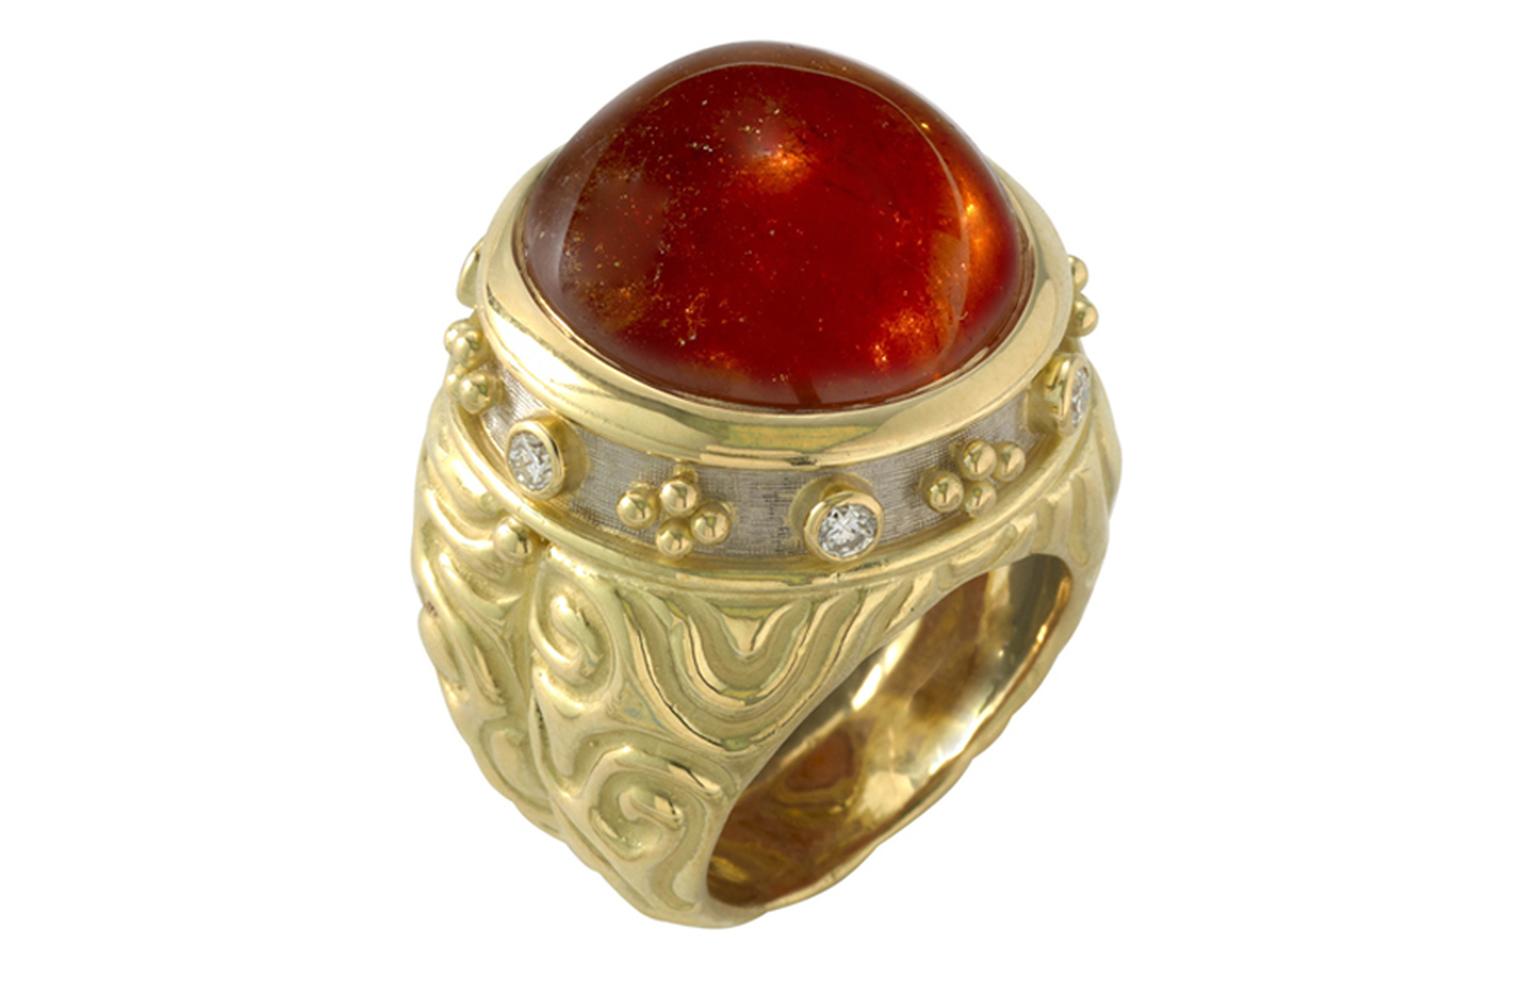 ELIZABETH GAGE, Charlemagne Ring, a glowing round orange cabochon garnet surrounded with diamonds and bead detail in yellow and white gold, with carved molten gold sides. £11,400